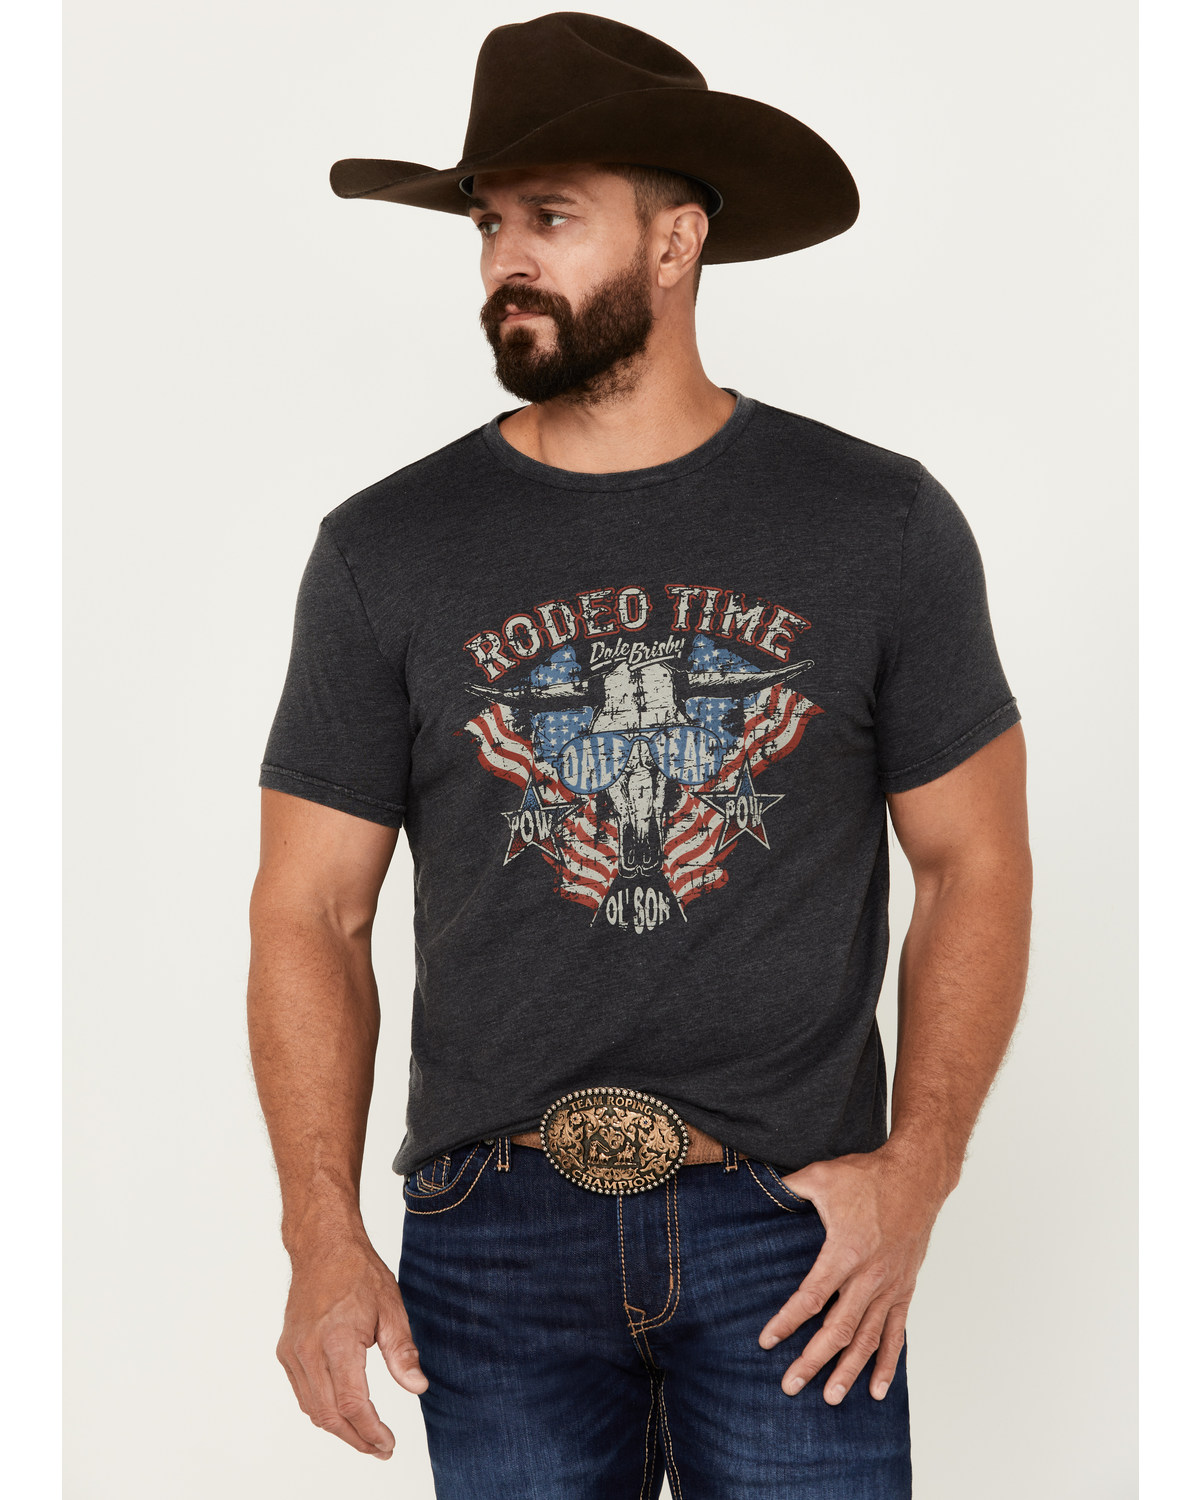 Panhandle Men's Dale Brisby Rodeo Time Short Sleeve T-Shirt